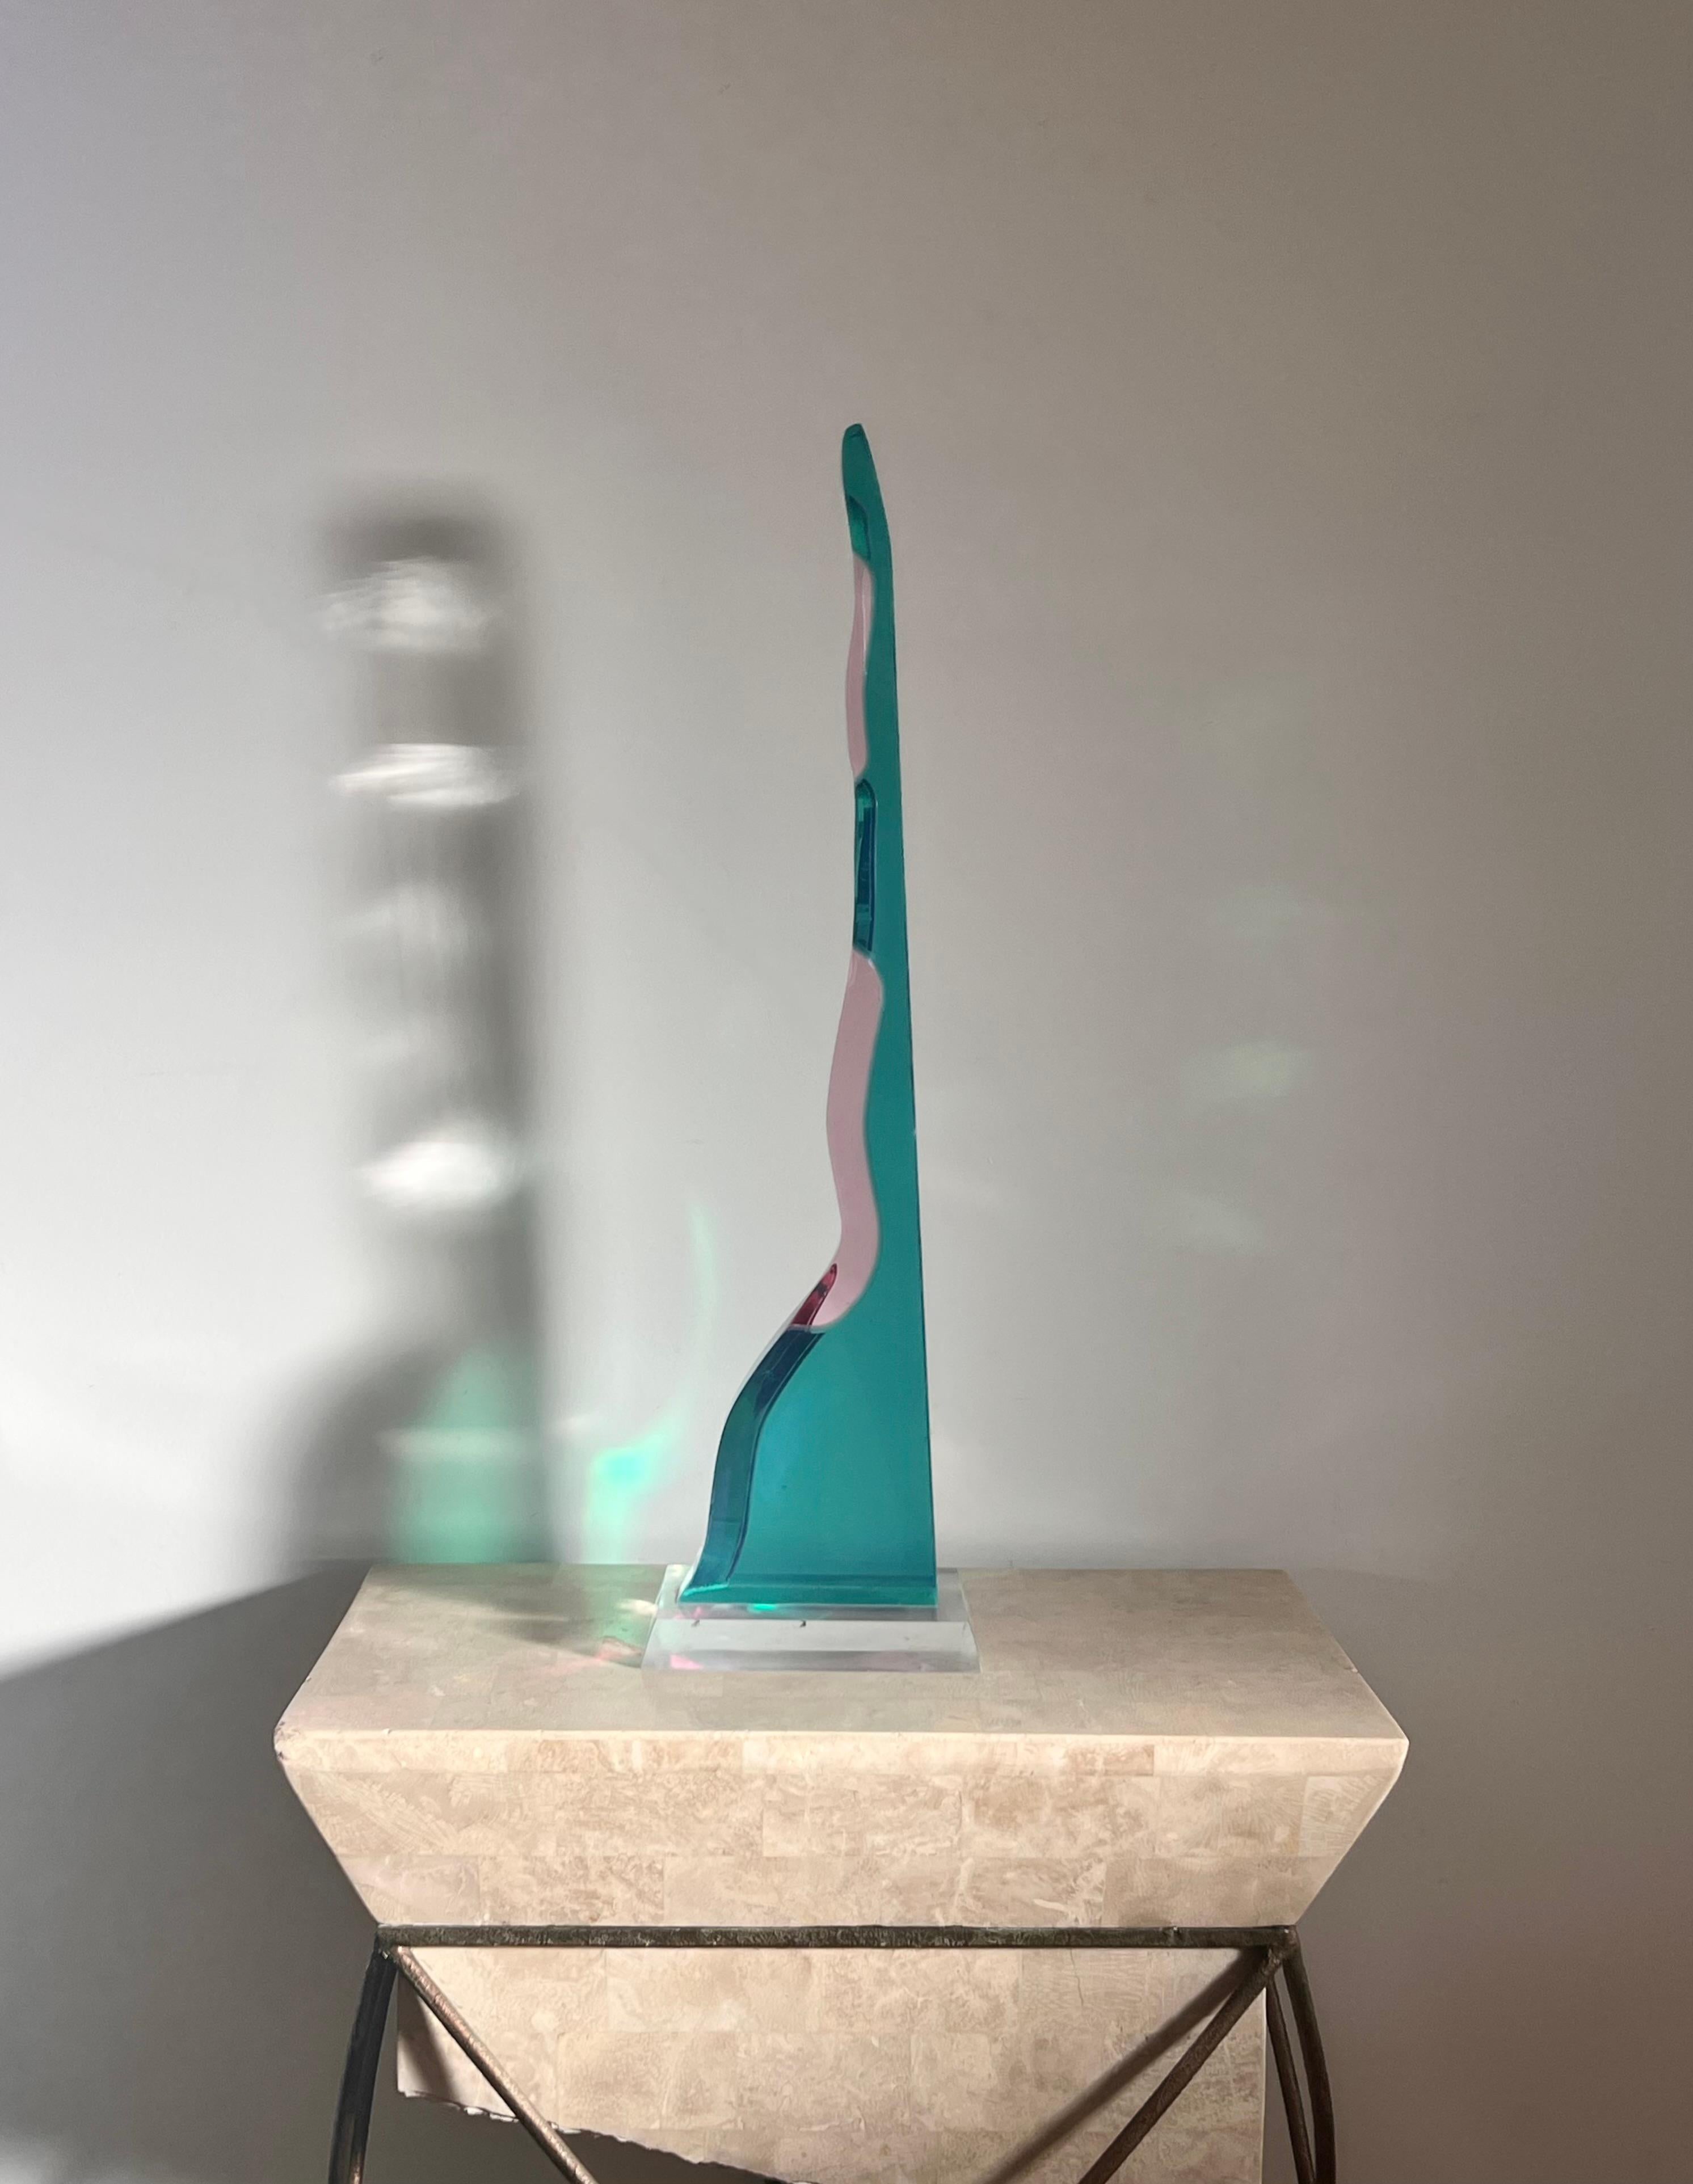 A tall abstract sculpture in lucite or acrylic, circa late 20th century. Tones of swimming pool blue, fuchsia, and ice pink. Slight scuffs along base as well as a small chip to top of sculpture - otherwise good condition. Refer to pics for detail